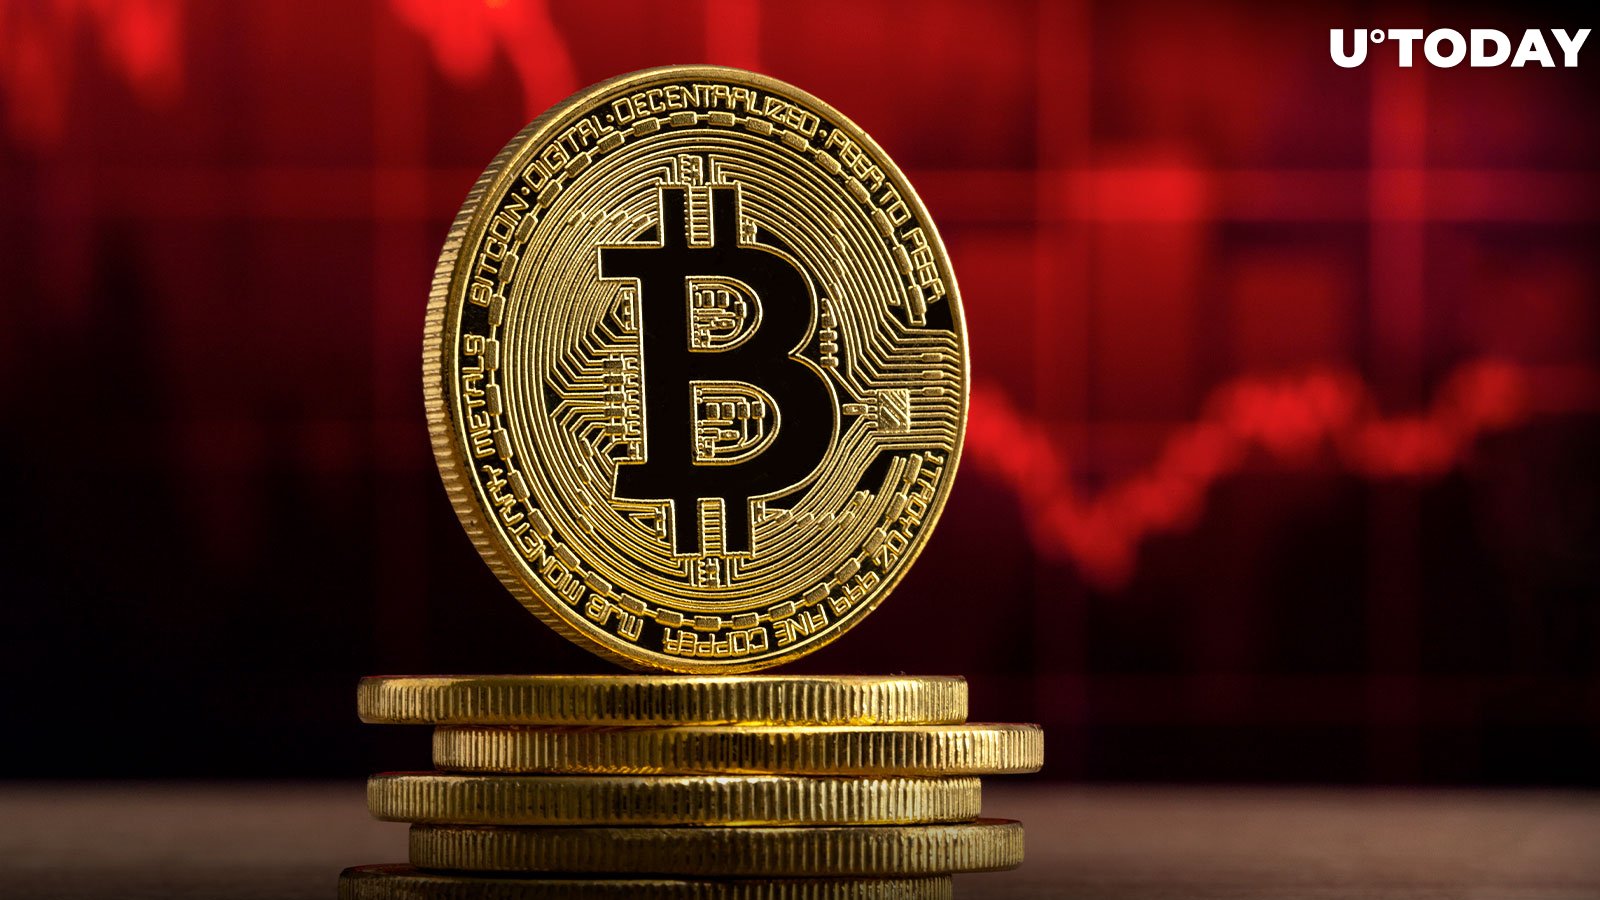 Bitcoin (BTC) Price Plunging After Crucial CPI Data